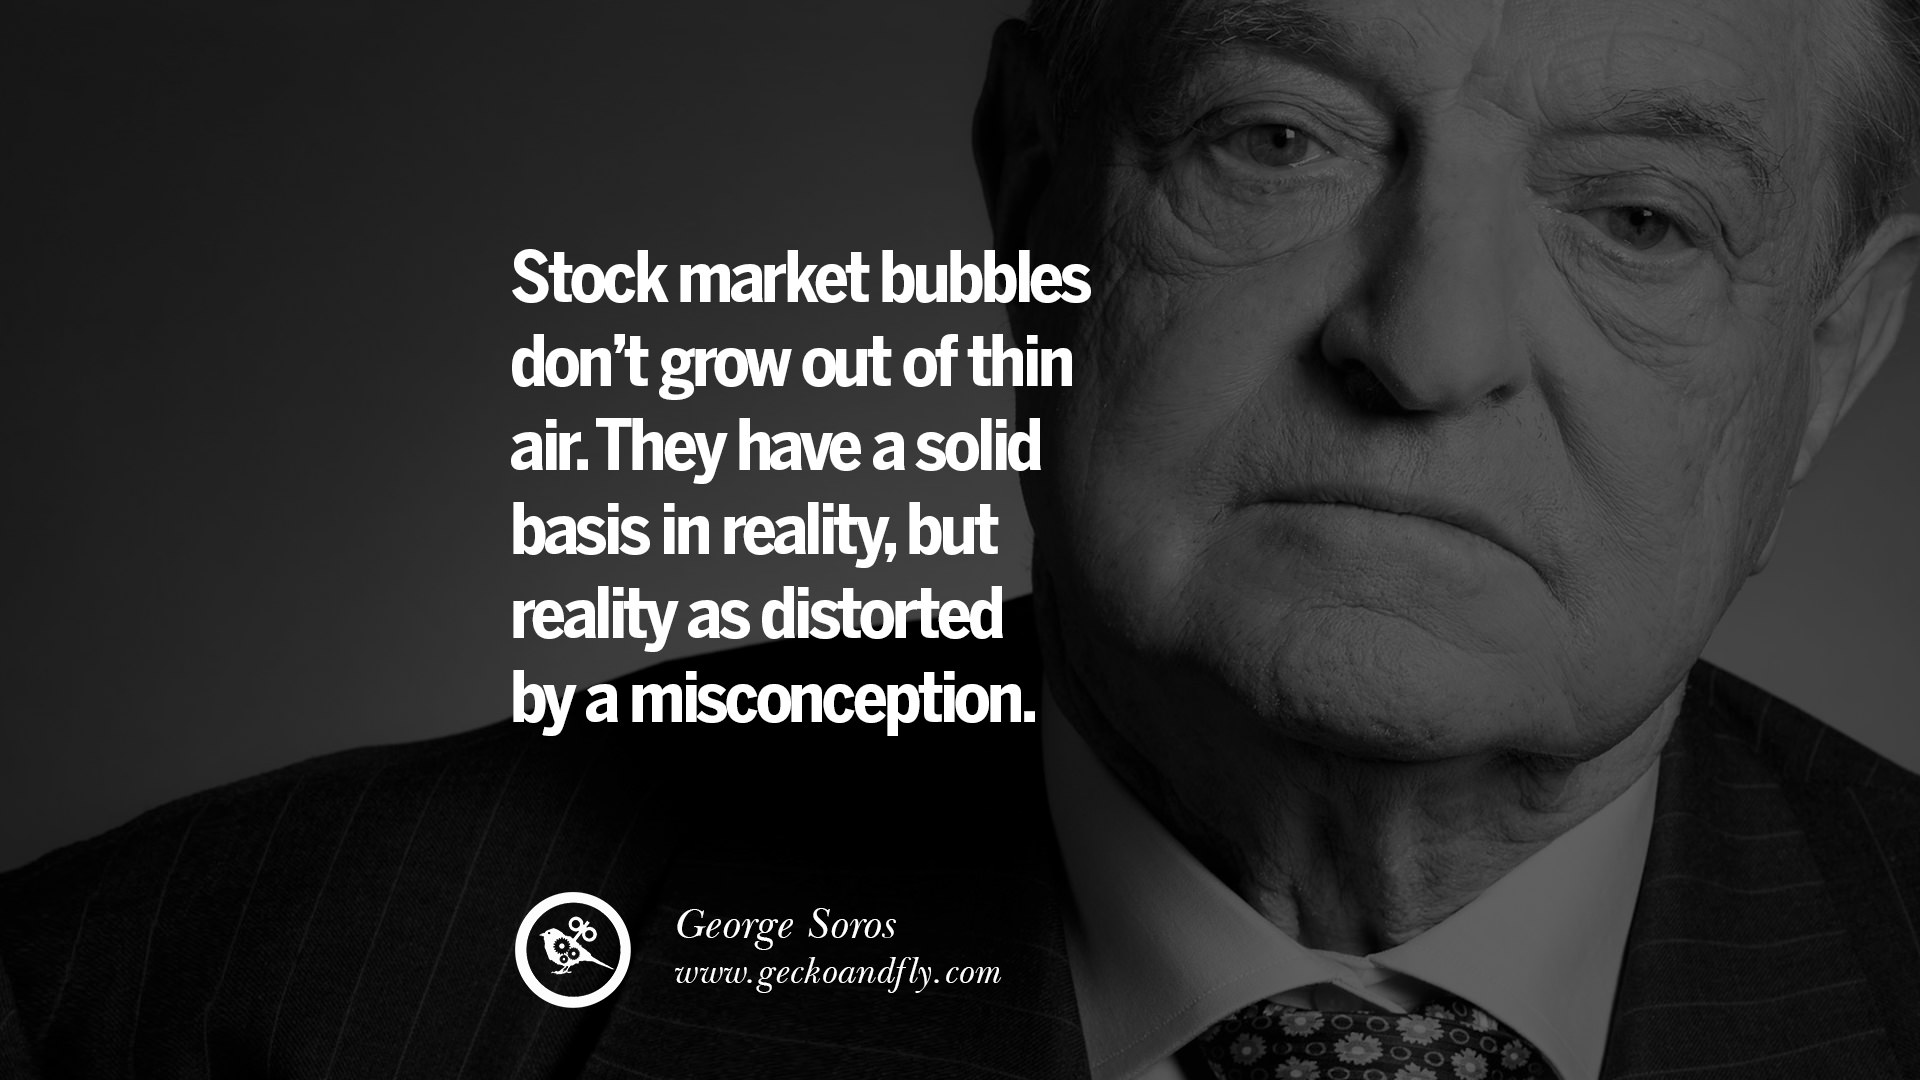 20 Inspiring Stock Market Investment Quotes by Successful Investors